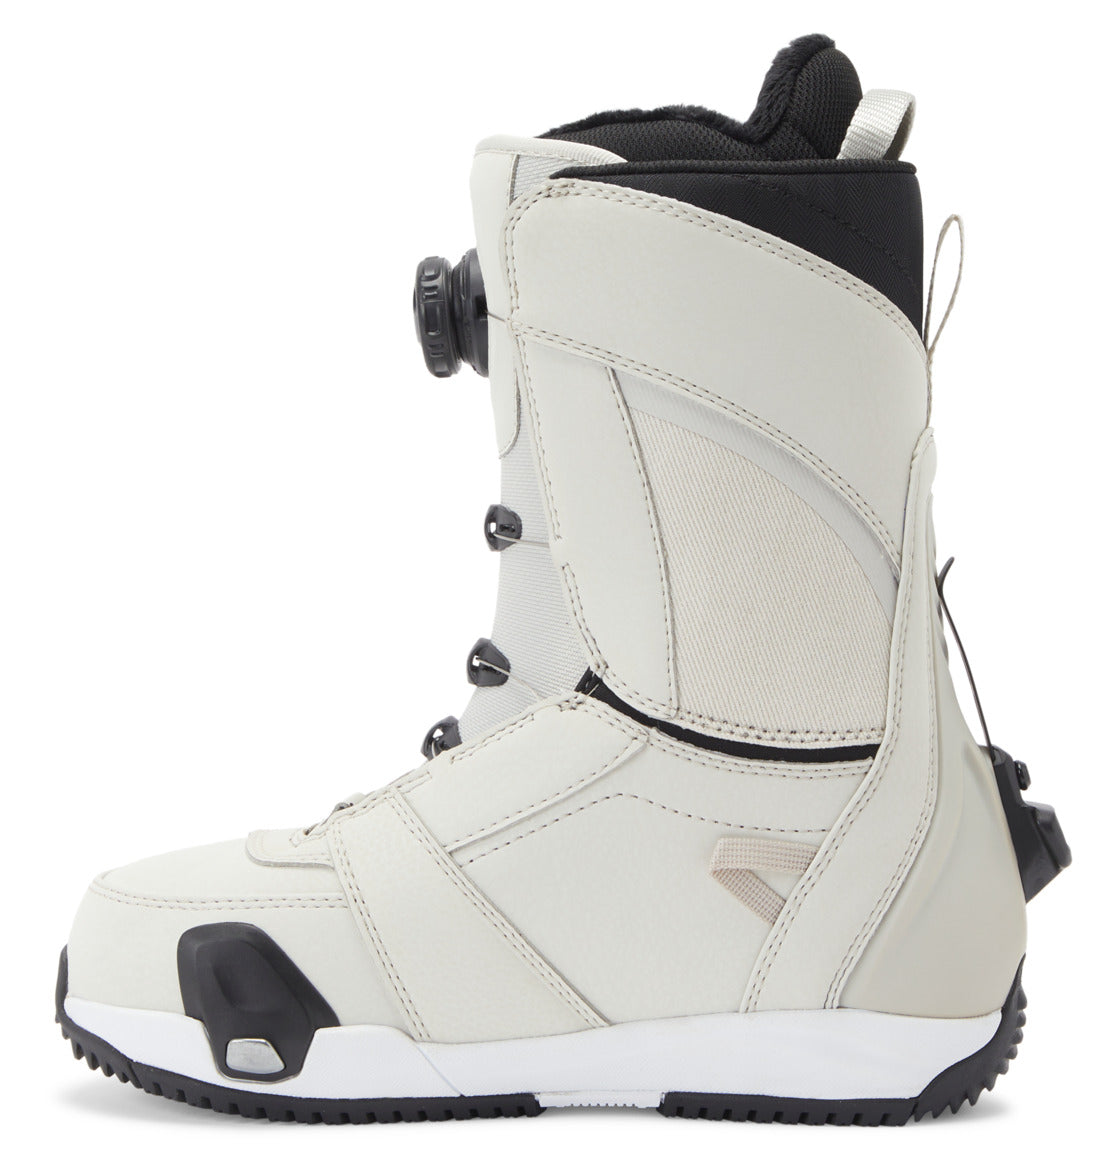 Women's Lotus Step On® Snowboard Boots